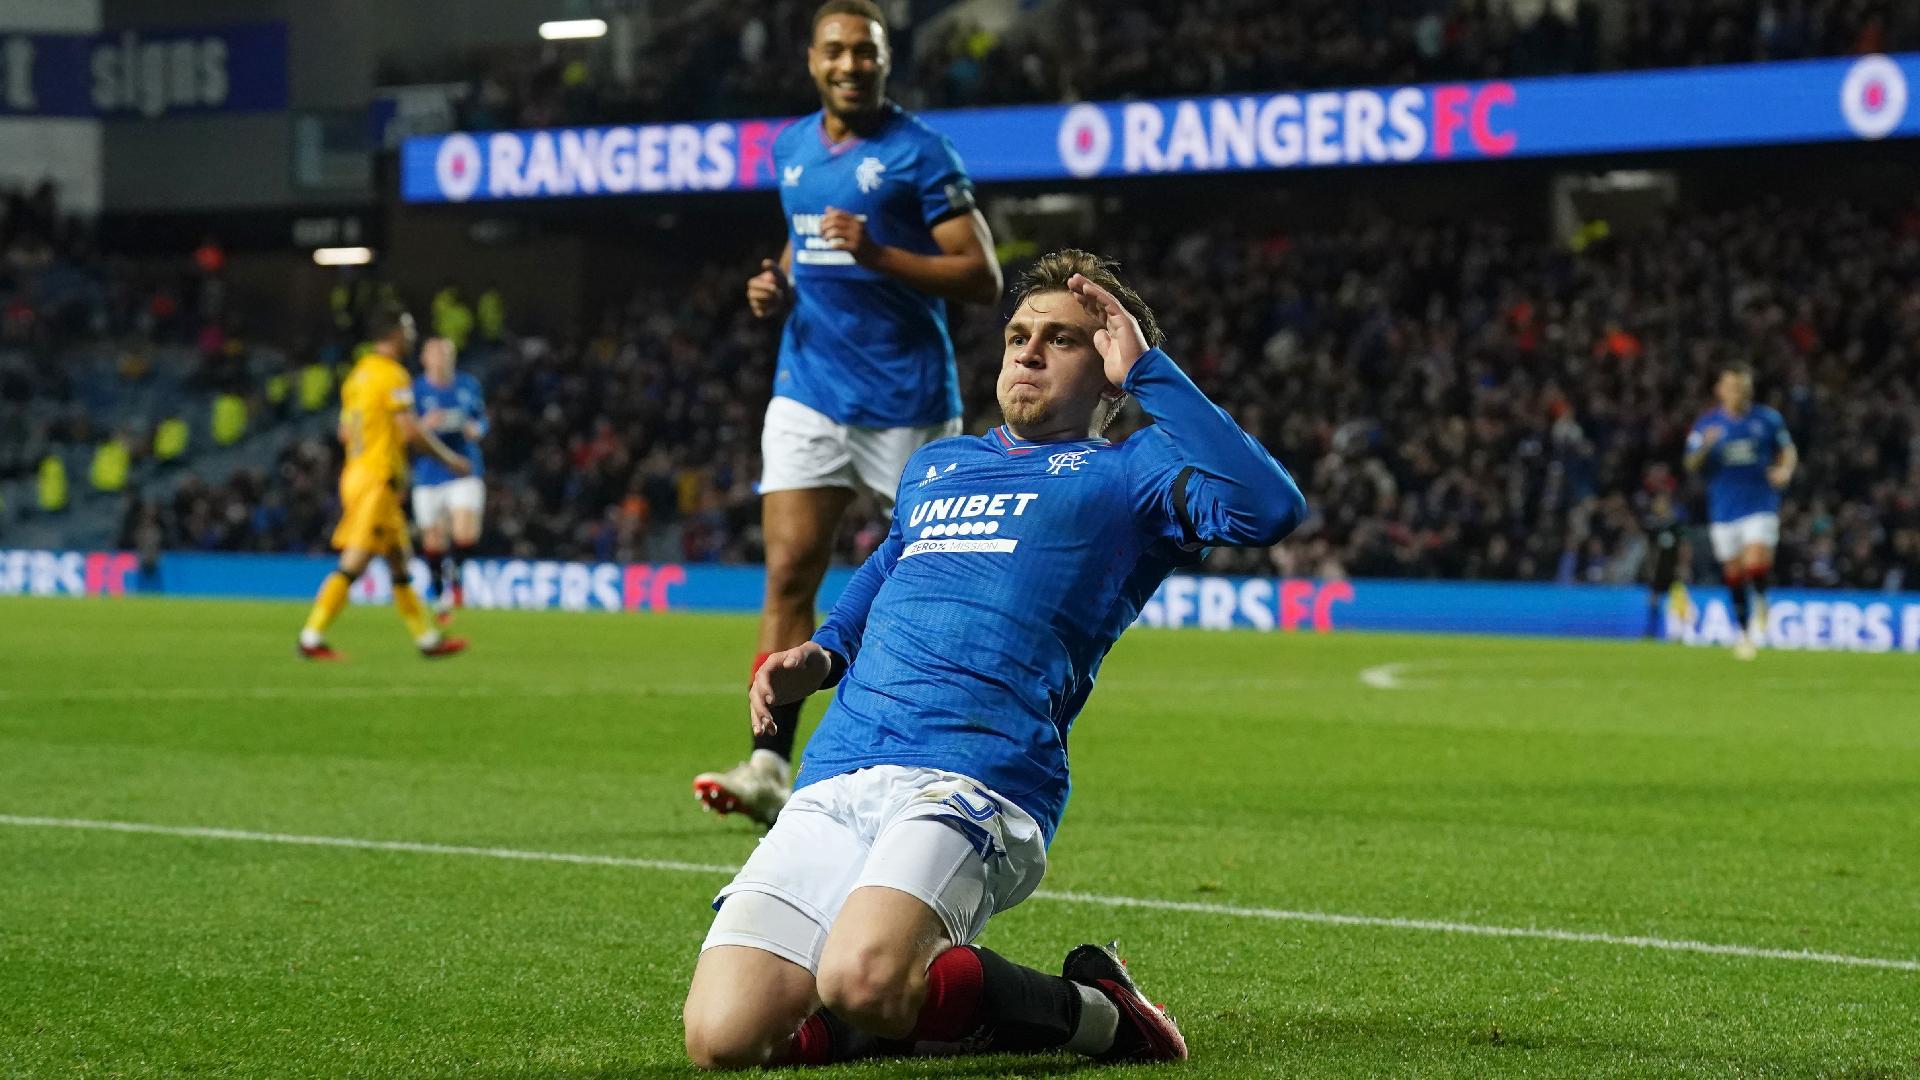 Rangers ease into Viaplay Cup semi-finals after hammering Livingston